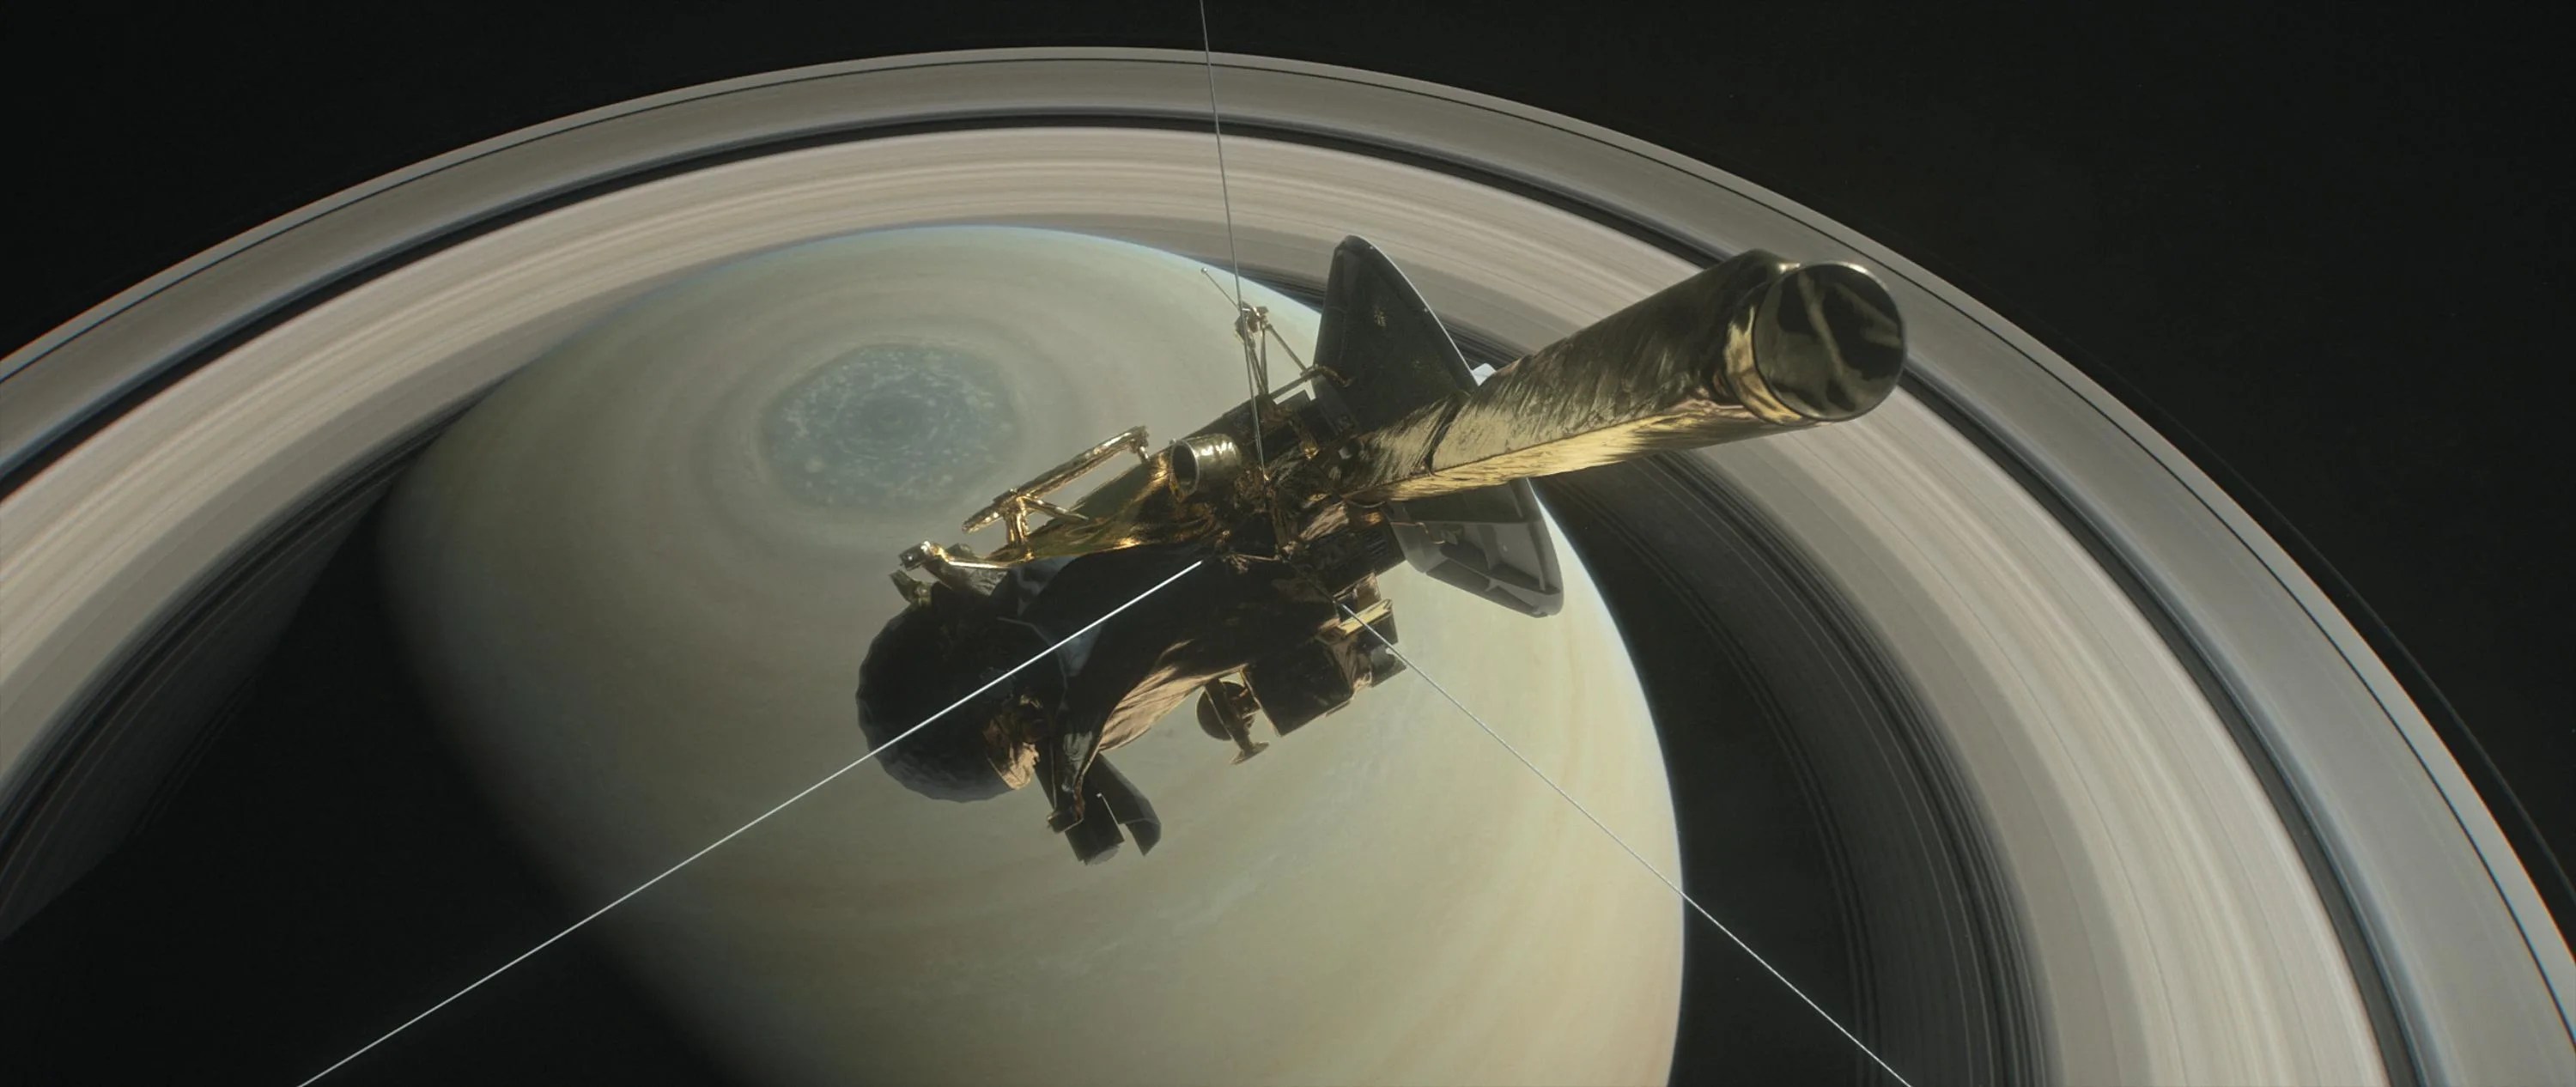 NASA's Cassini spacecraft is shown heading for the gap between Saturn and its rings during one of 22 such dives of the mission's finale in this illustration. The spacecraft will make a final plunge into the planet's atmosphere on Sept. 15.